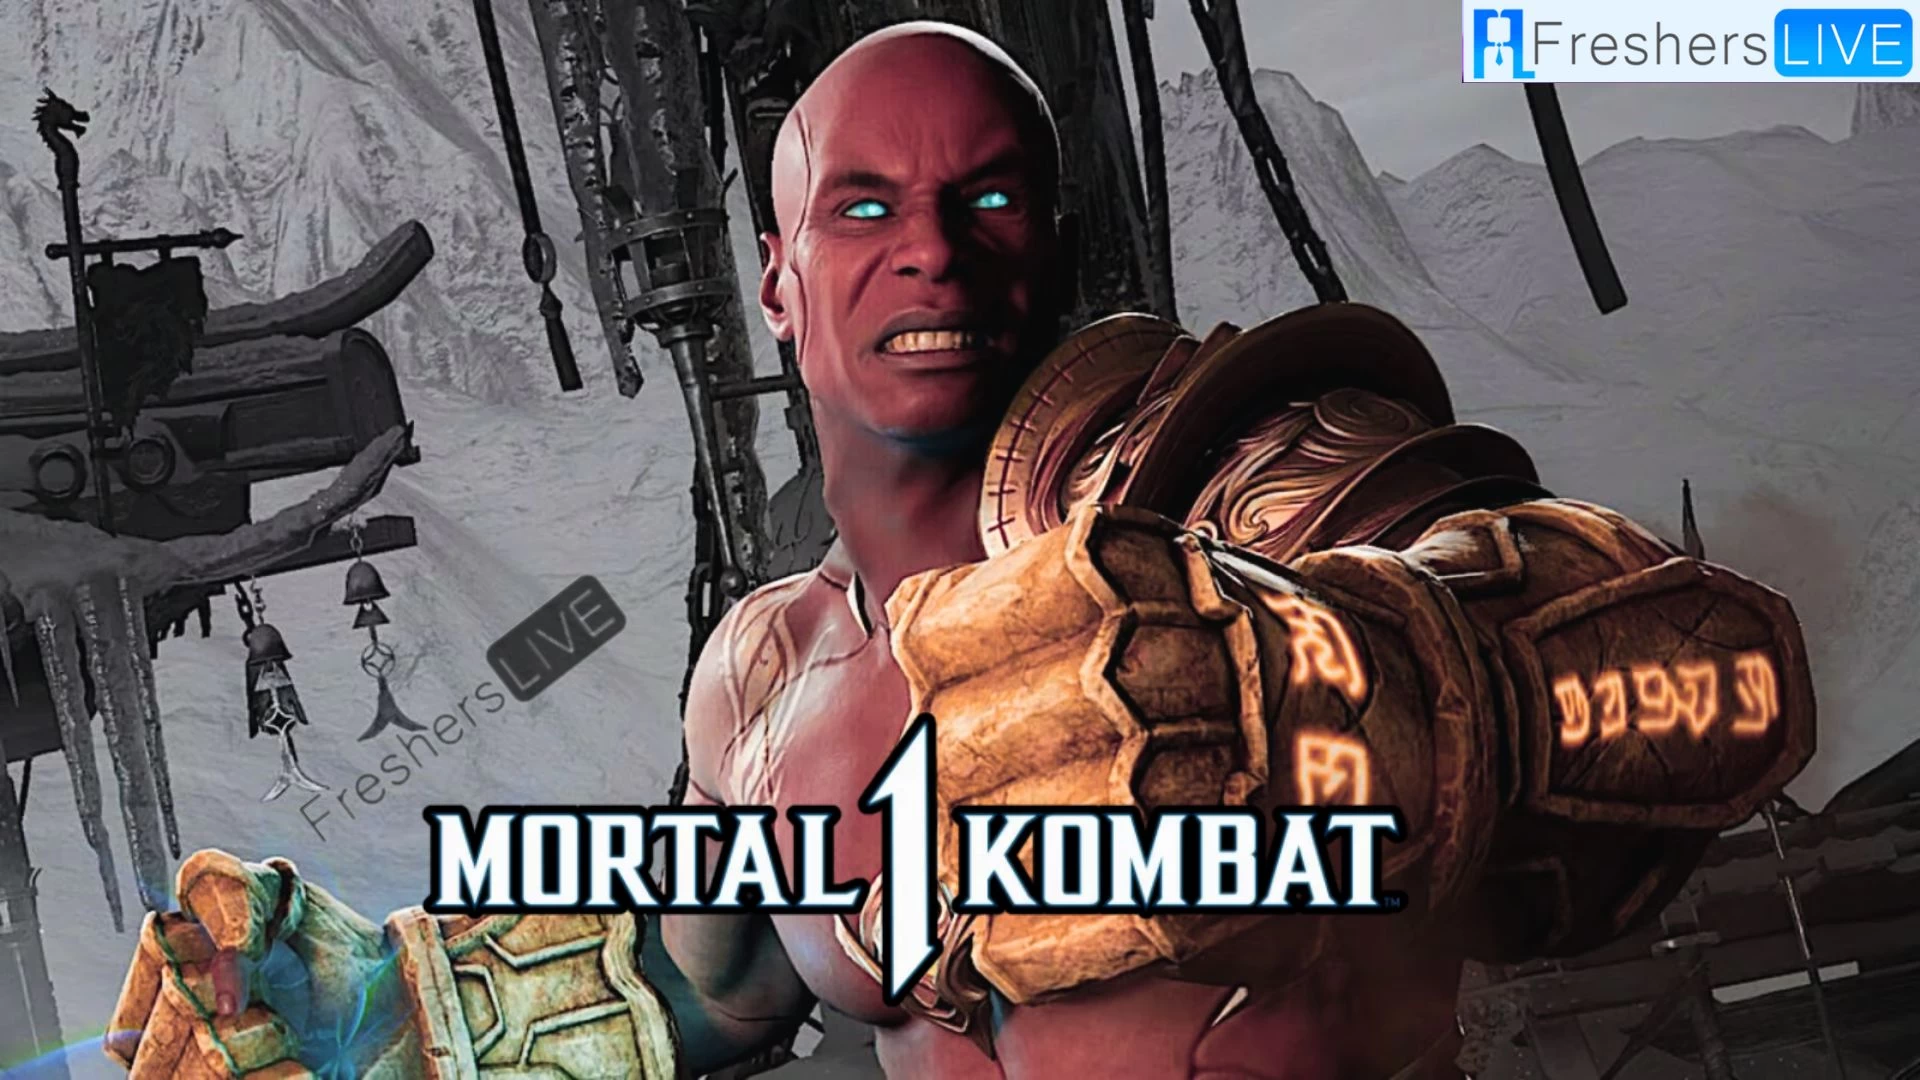 Mortal Kombat 1 Smoke Character Guide, Smoke's Special Moves, Fatalities and Brutalities